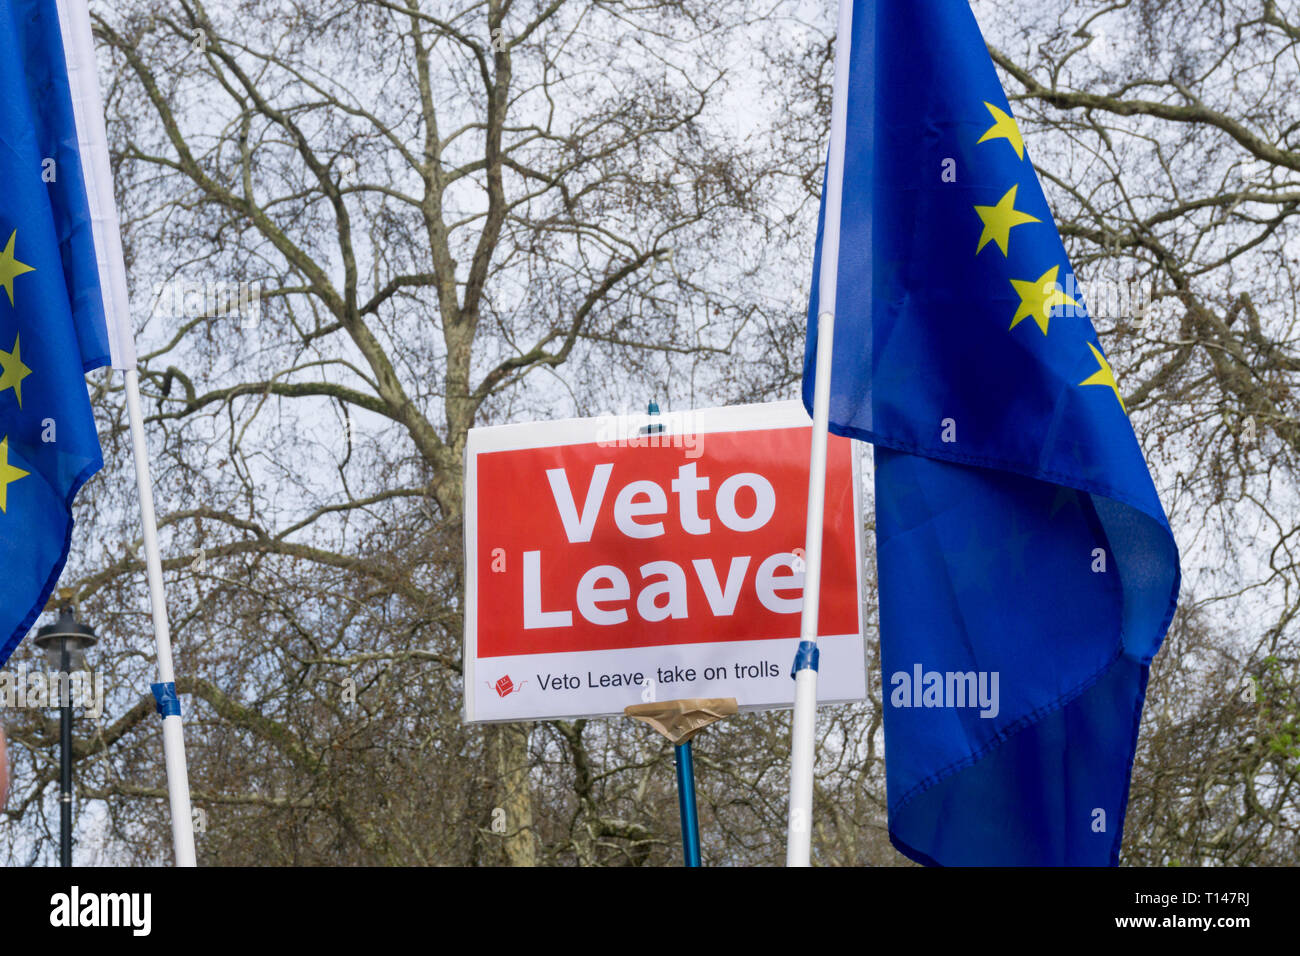 London, UK. 23 March 2019. Over 1,000,000 people are estimated to have taken part in the March for a People's Vote today, from Park Lane to Parliament Square in London. UrbanImages-News/Alamy Live News Stock Photo